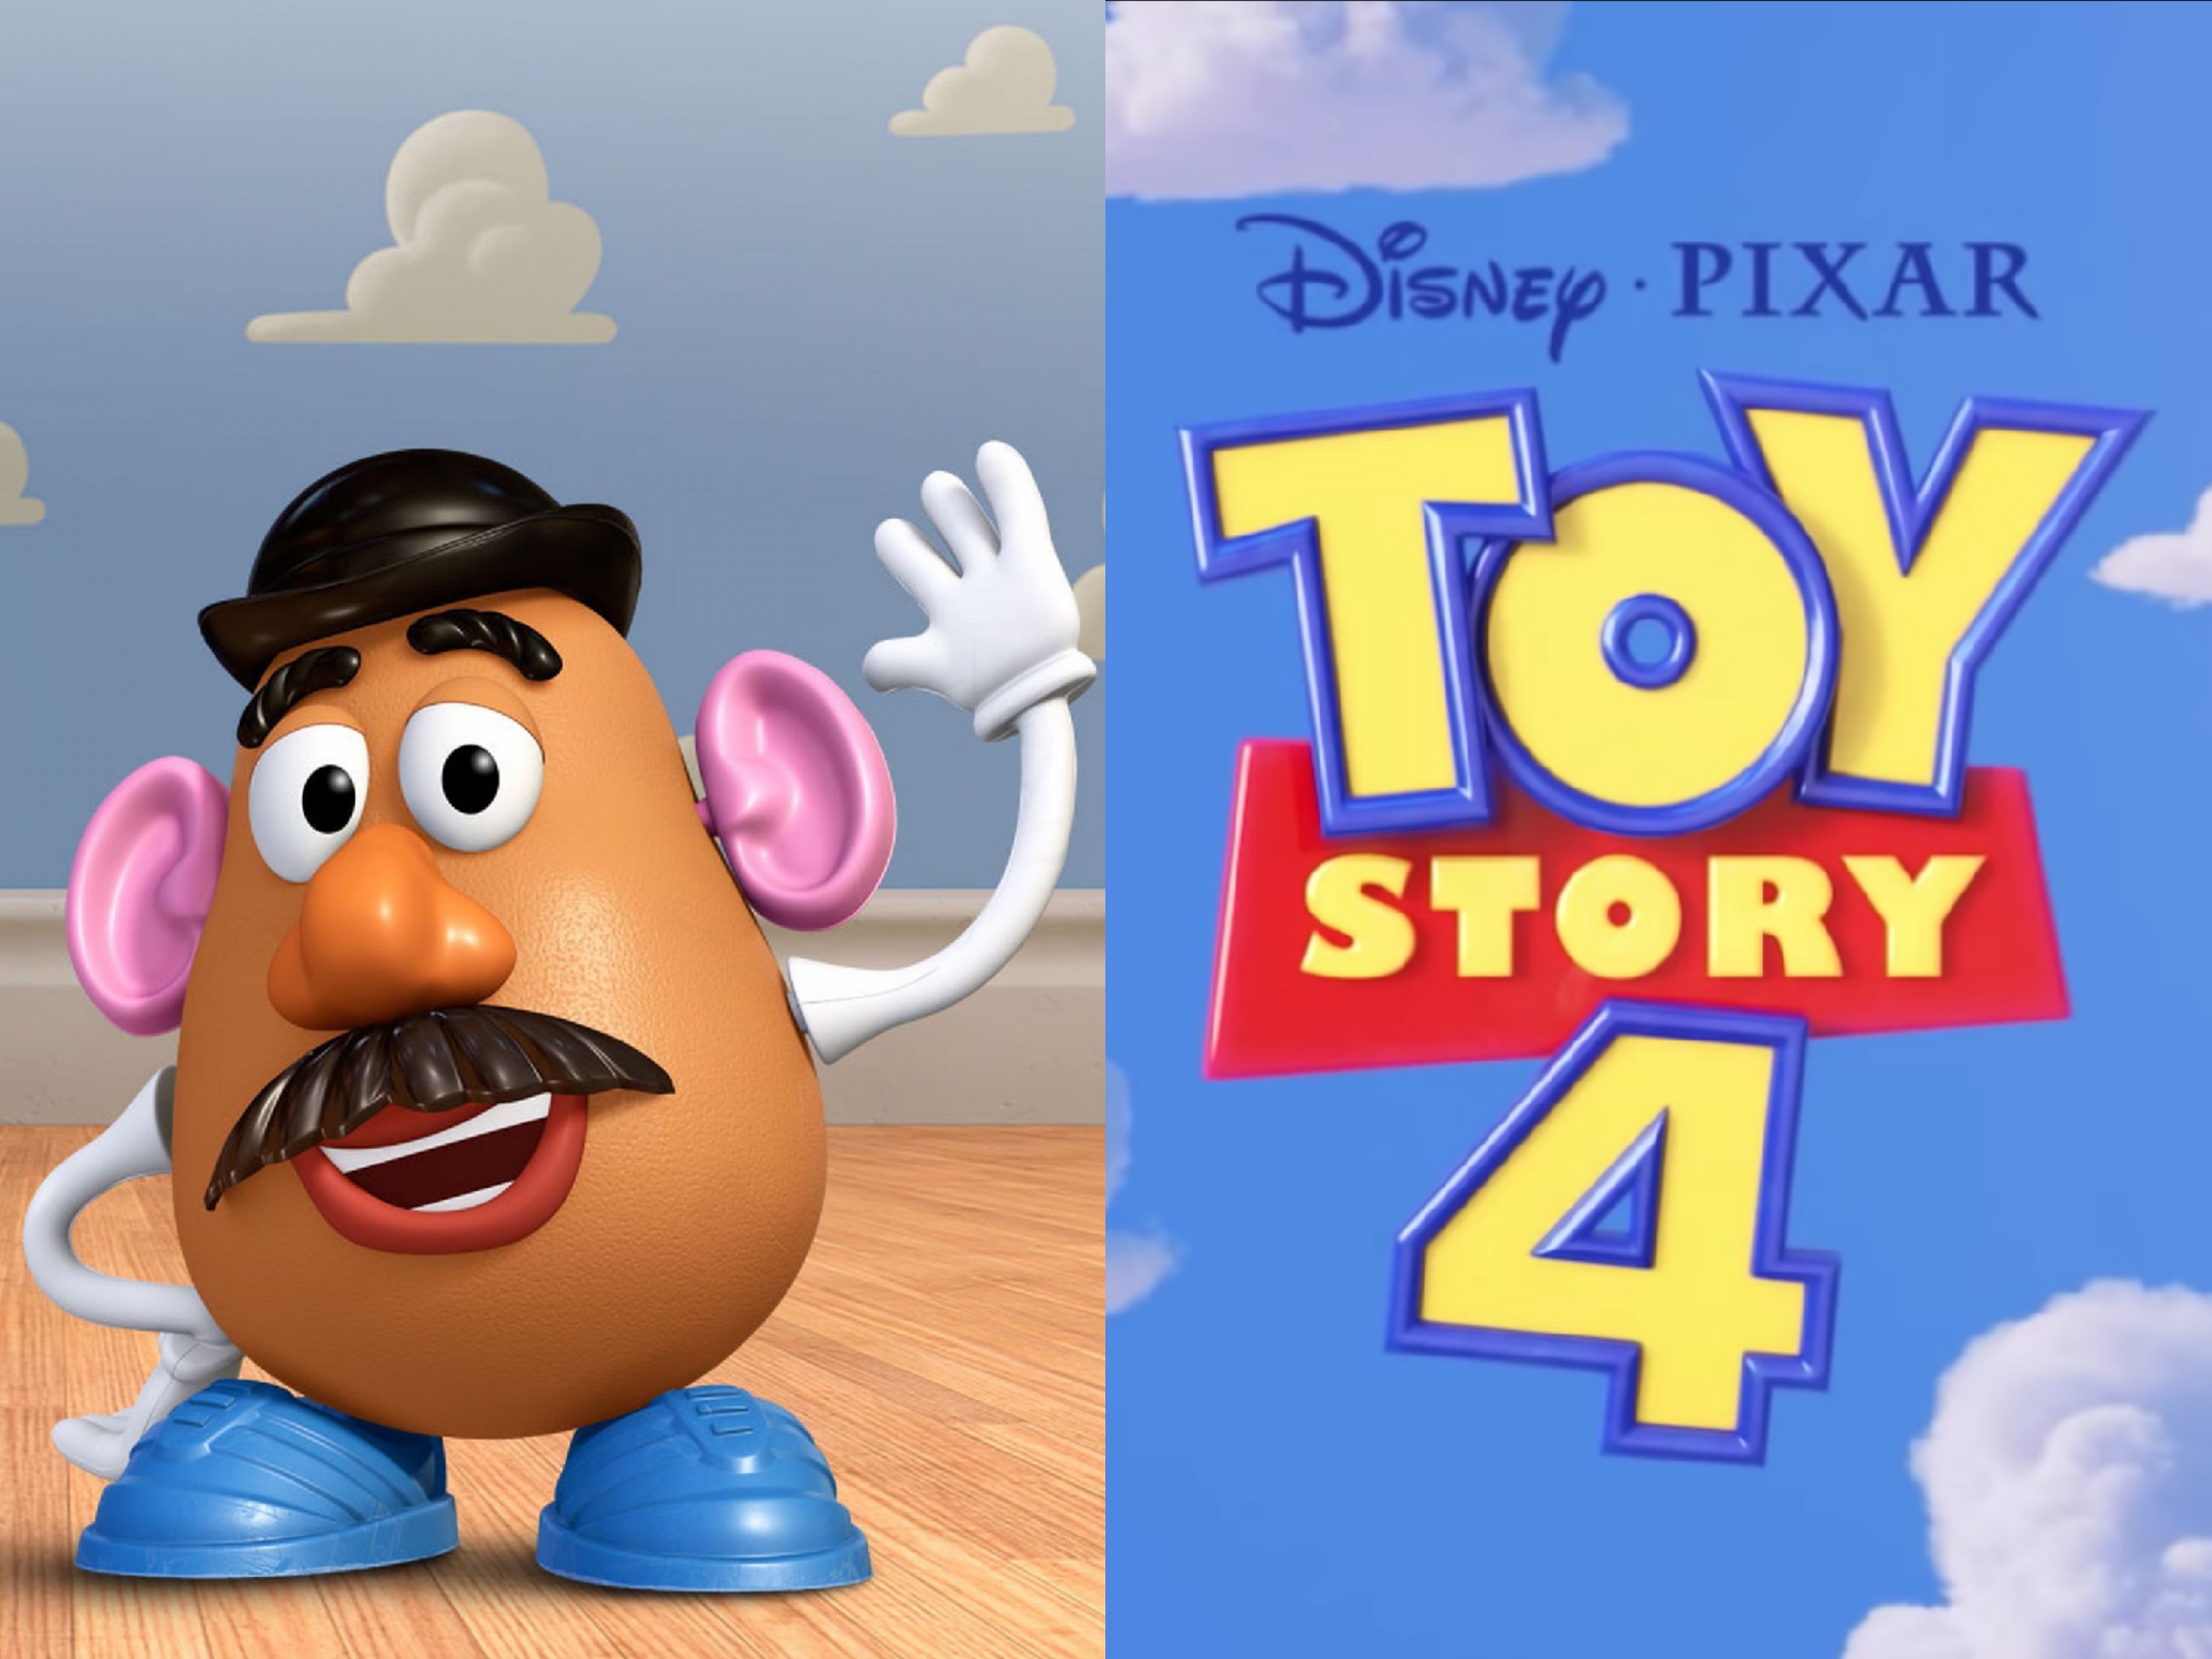 Don Rickles to Voice Mr. Potato Head in 'Toy Story 4' – Toy Story Fangirl